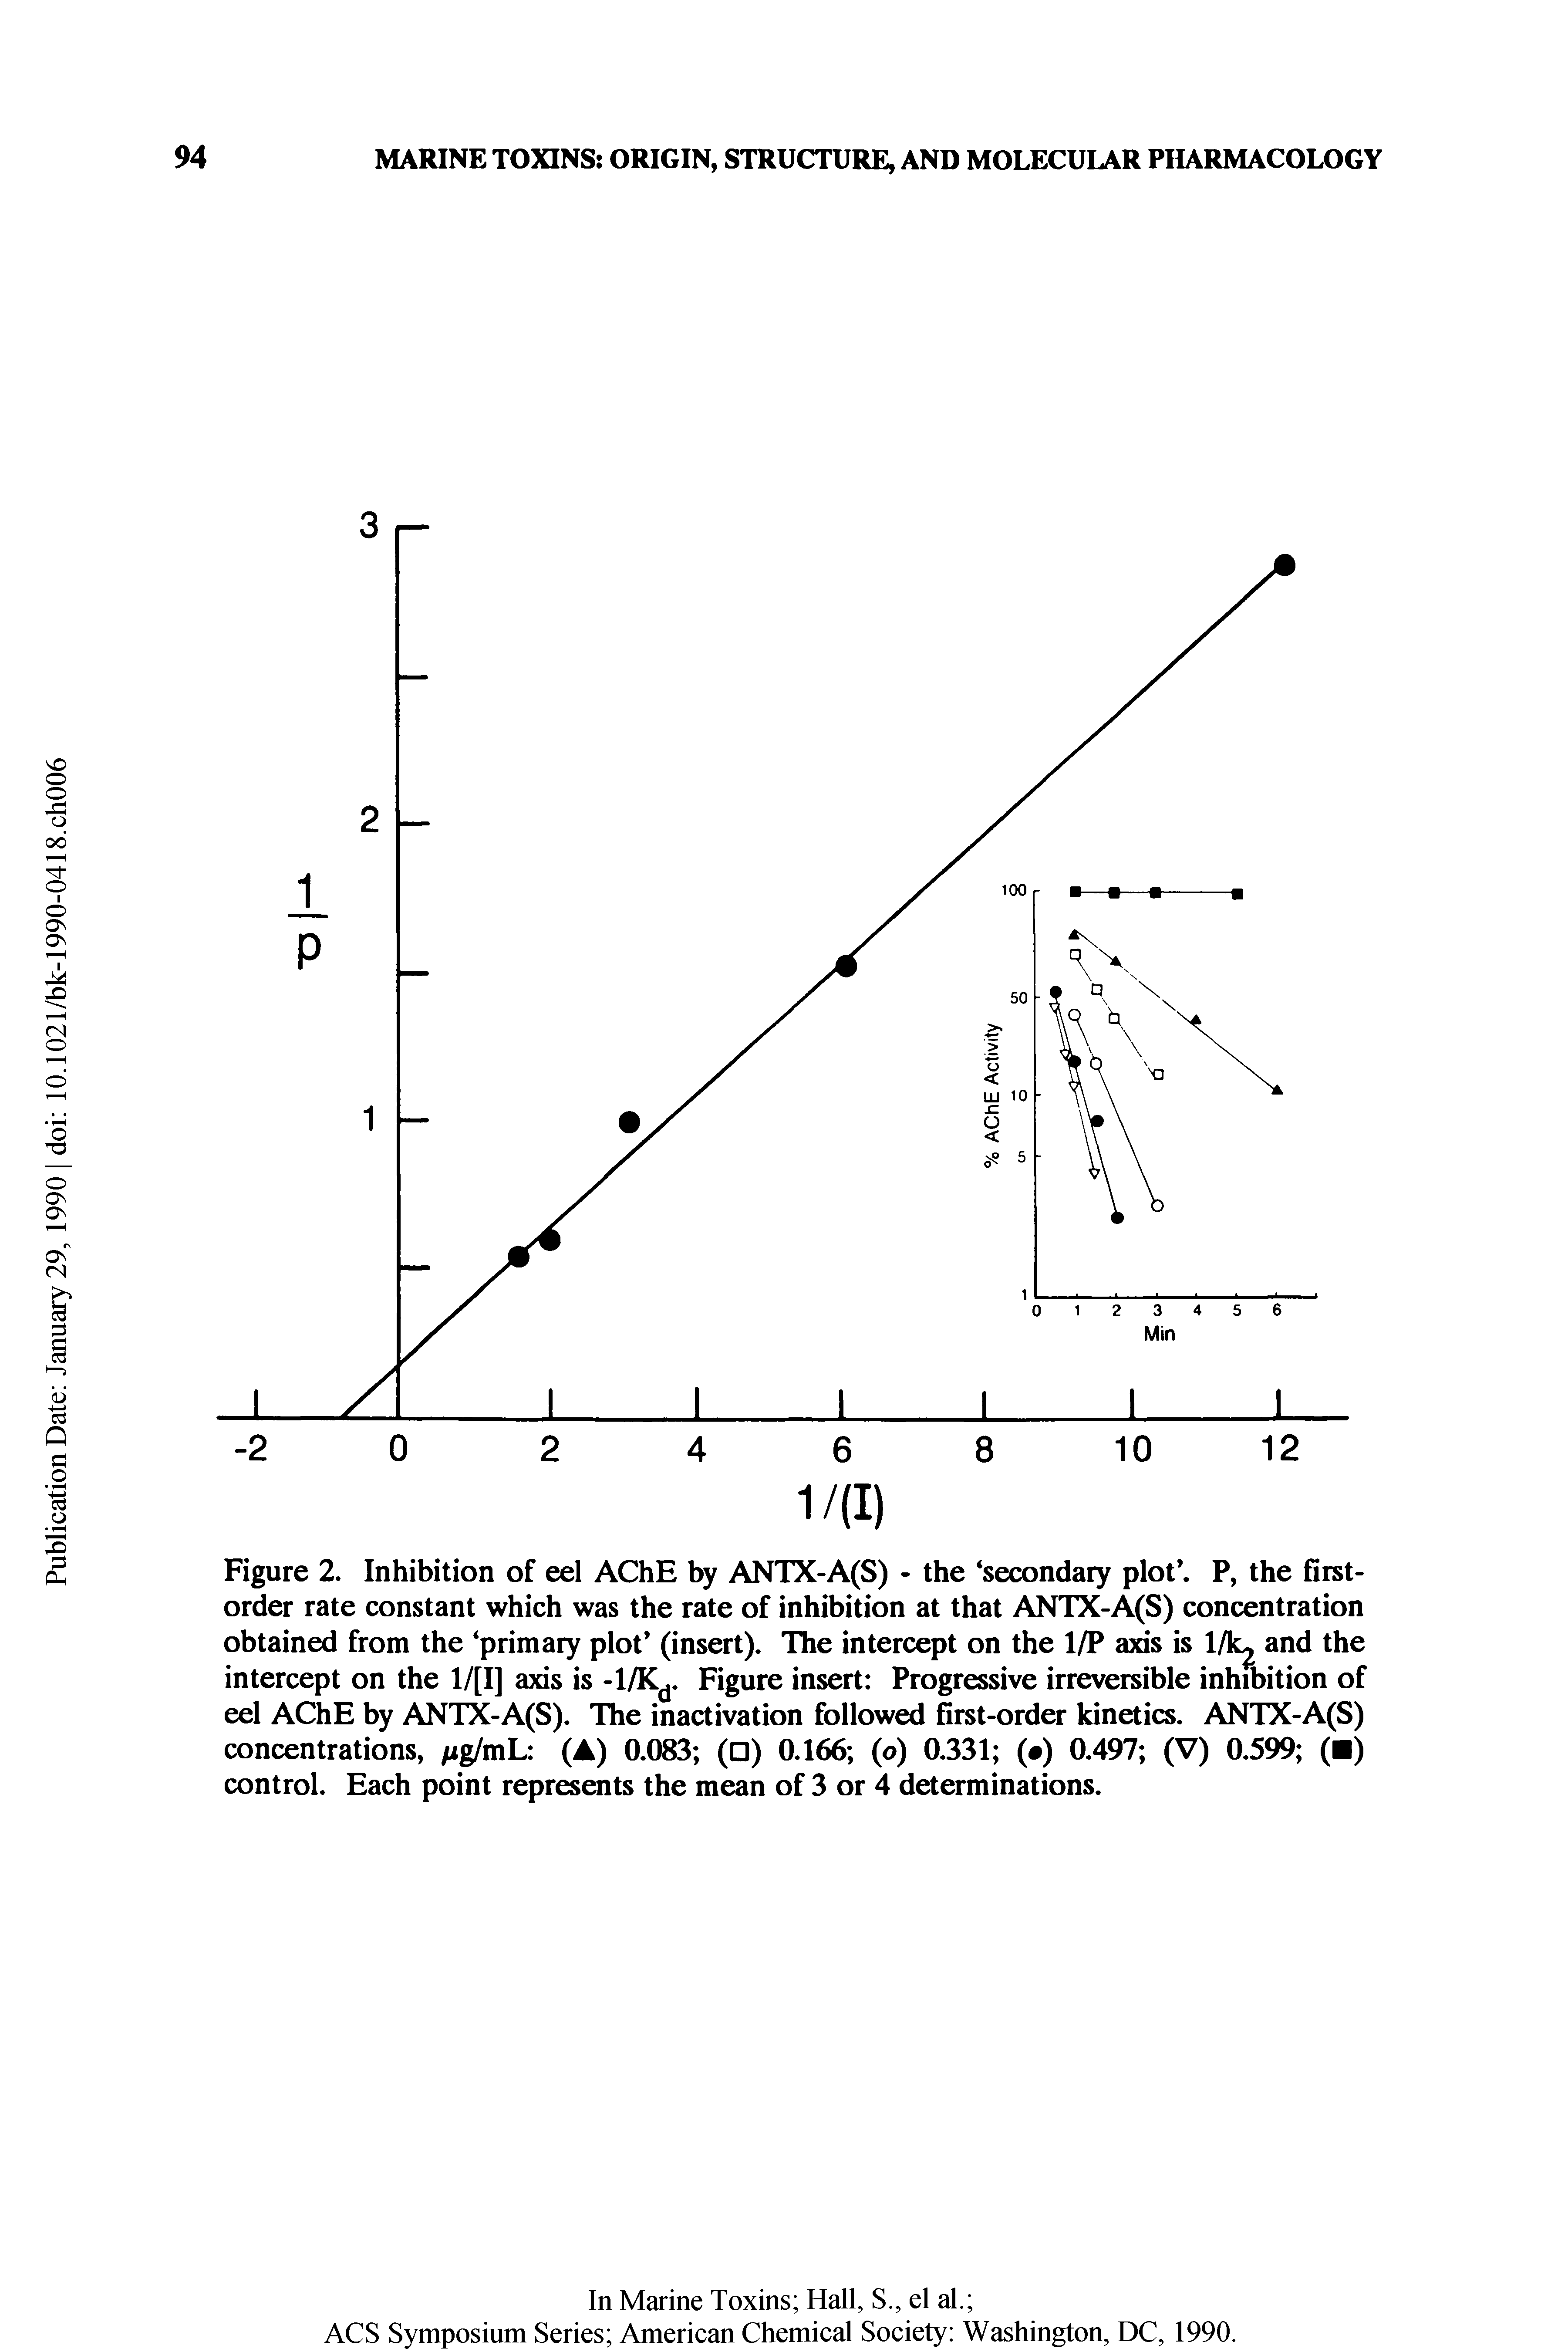 Figure 2. Inhibition of eel AChE by ANTX-A(S) - the secondary plot. P, the first-order rate constant which was the rate of inhibition at that ANTX-A(S) concentration obtained from the primary plot (insert). The intercept on the 1/P axis is 1/k and the intercept on the 1/[I] axis is -1/K. Figure insert Progressive irreversible inhibition of eel AChE by ANTX-A(S). The inactivation followed first-order kinetics. ANTX-A(S) concentrations, xg/mL (A) 0.083 ( ) 0.166 (o) 0.331 ( ) 0.497 (V) 0.599 ( ) control. Each point represents the mean of 3 or 4 determinations.